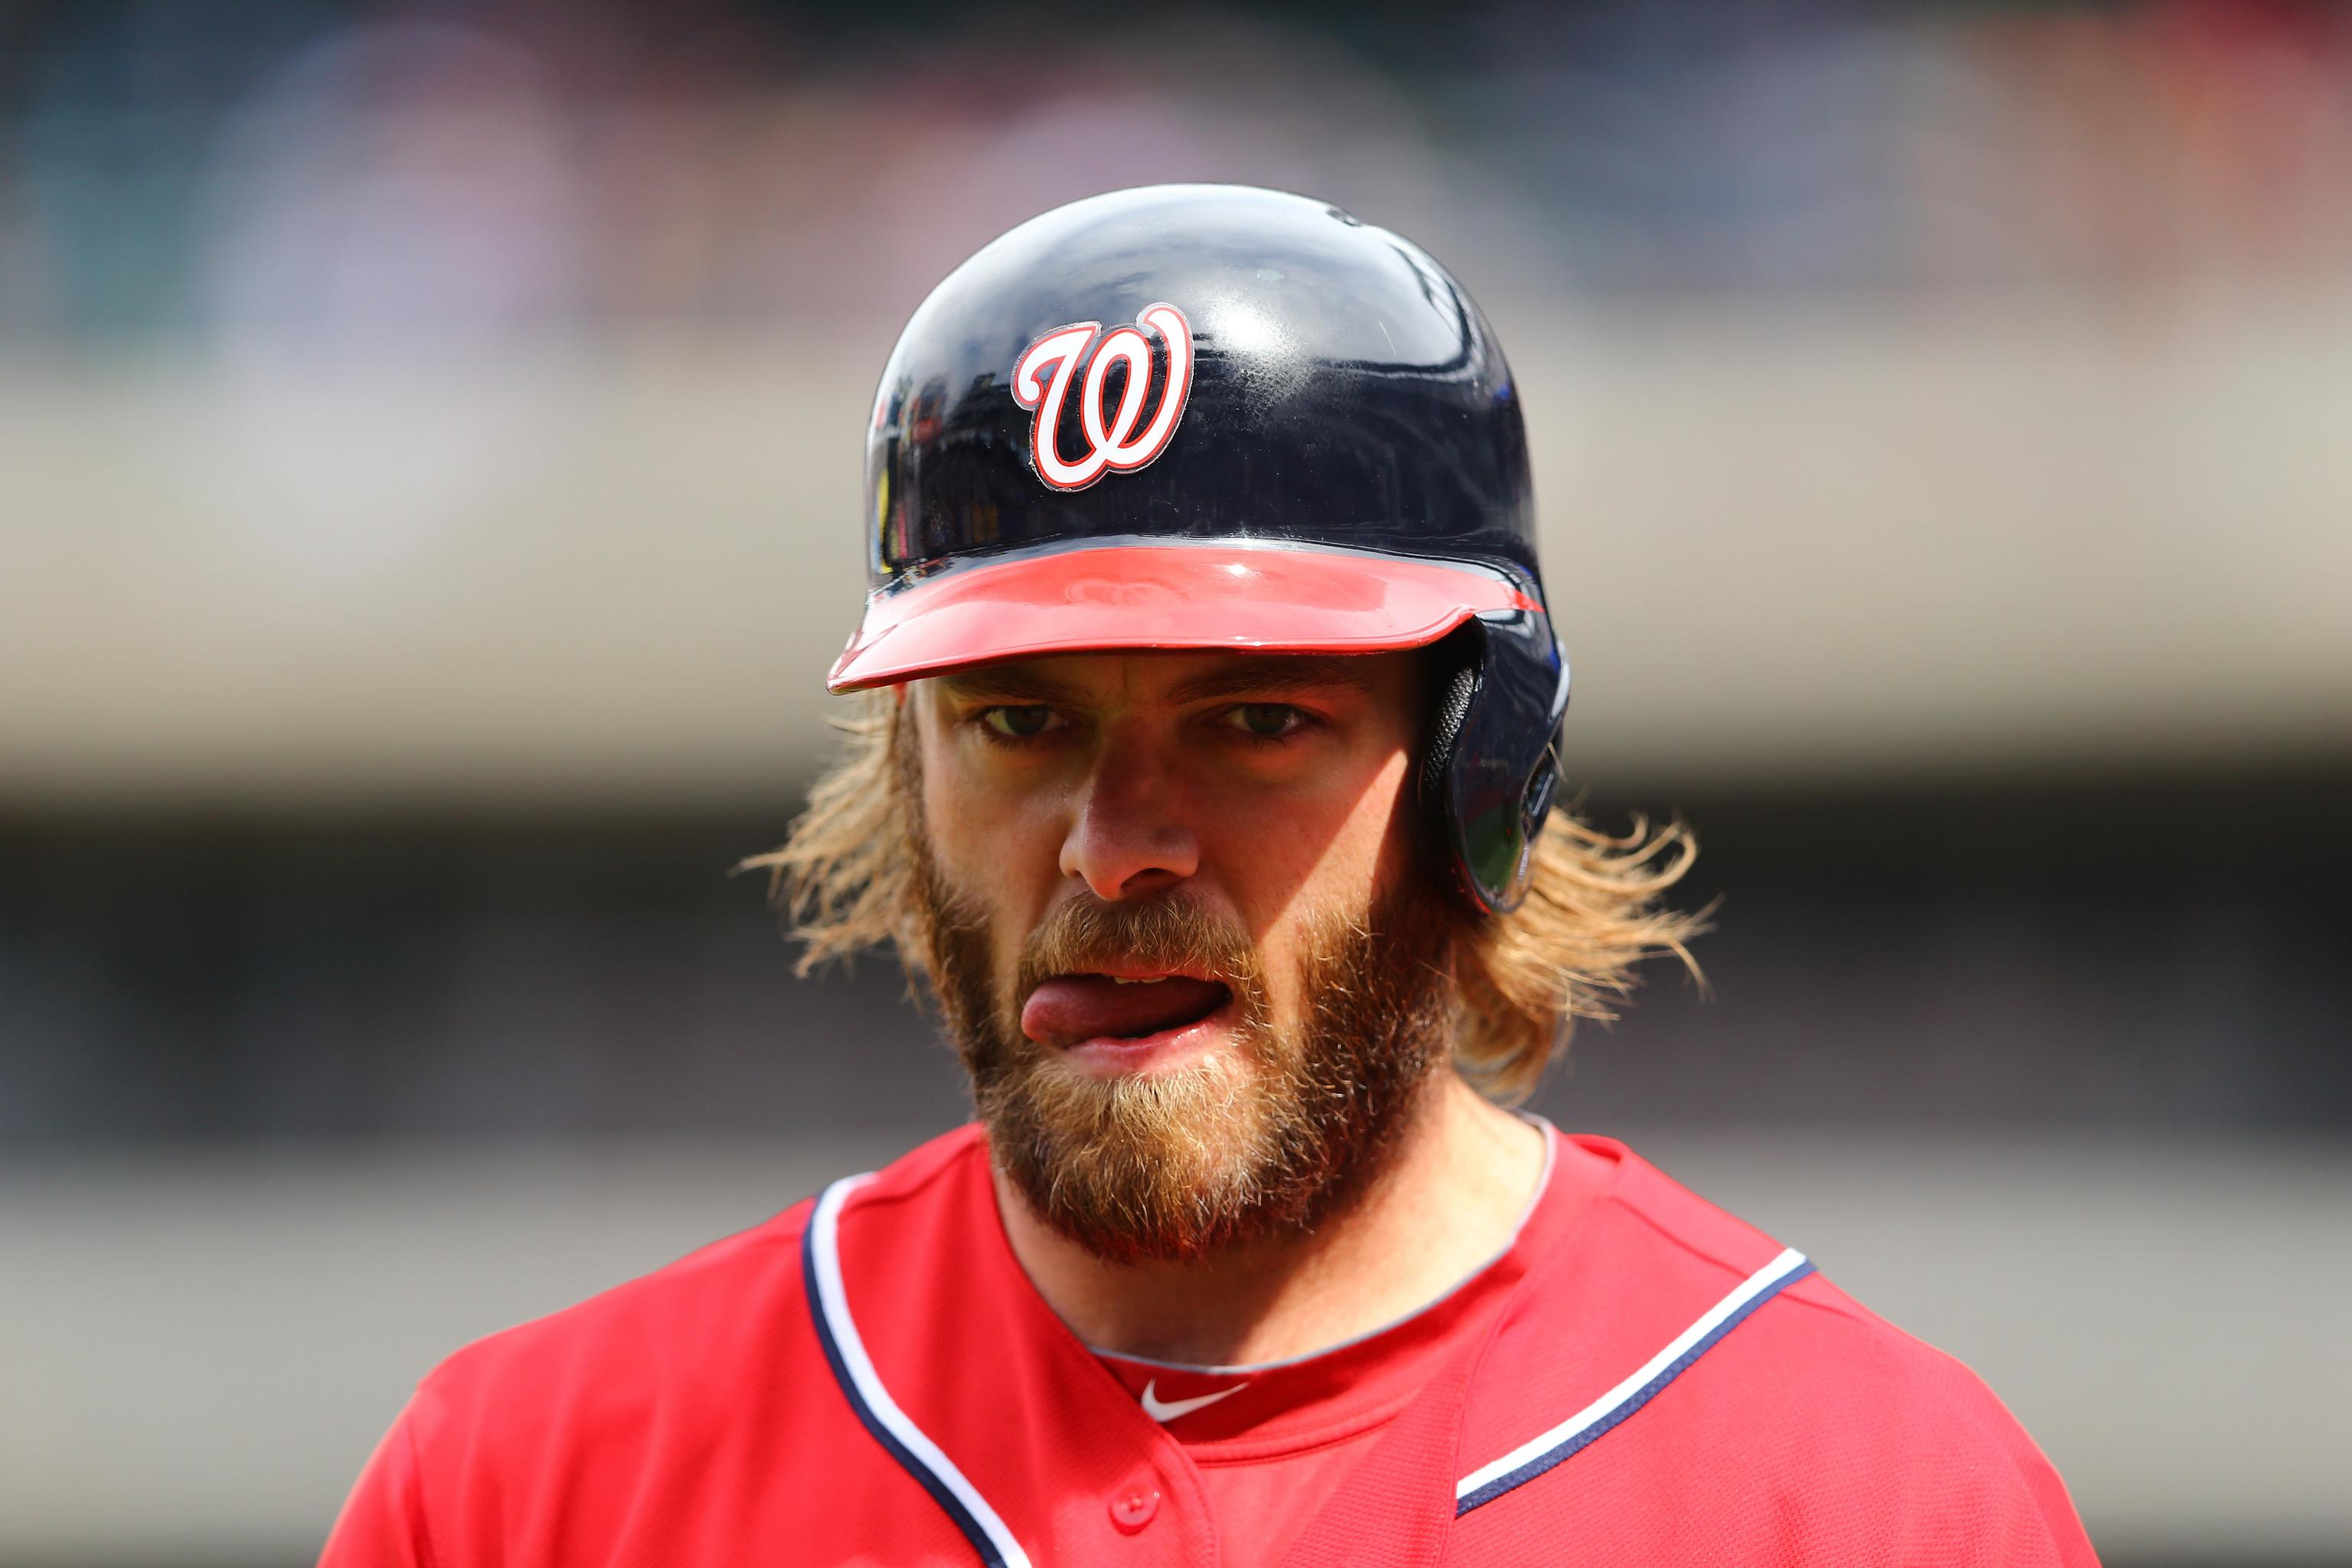 Bryce Harper looks like a different person after shaving his beard